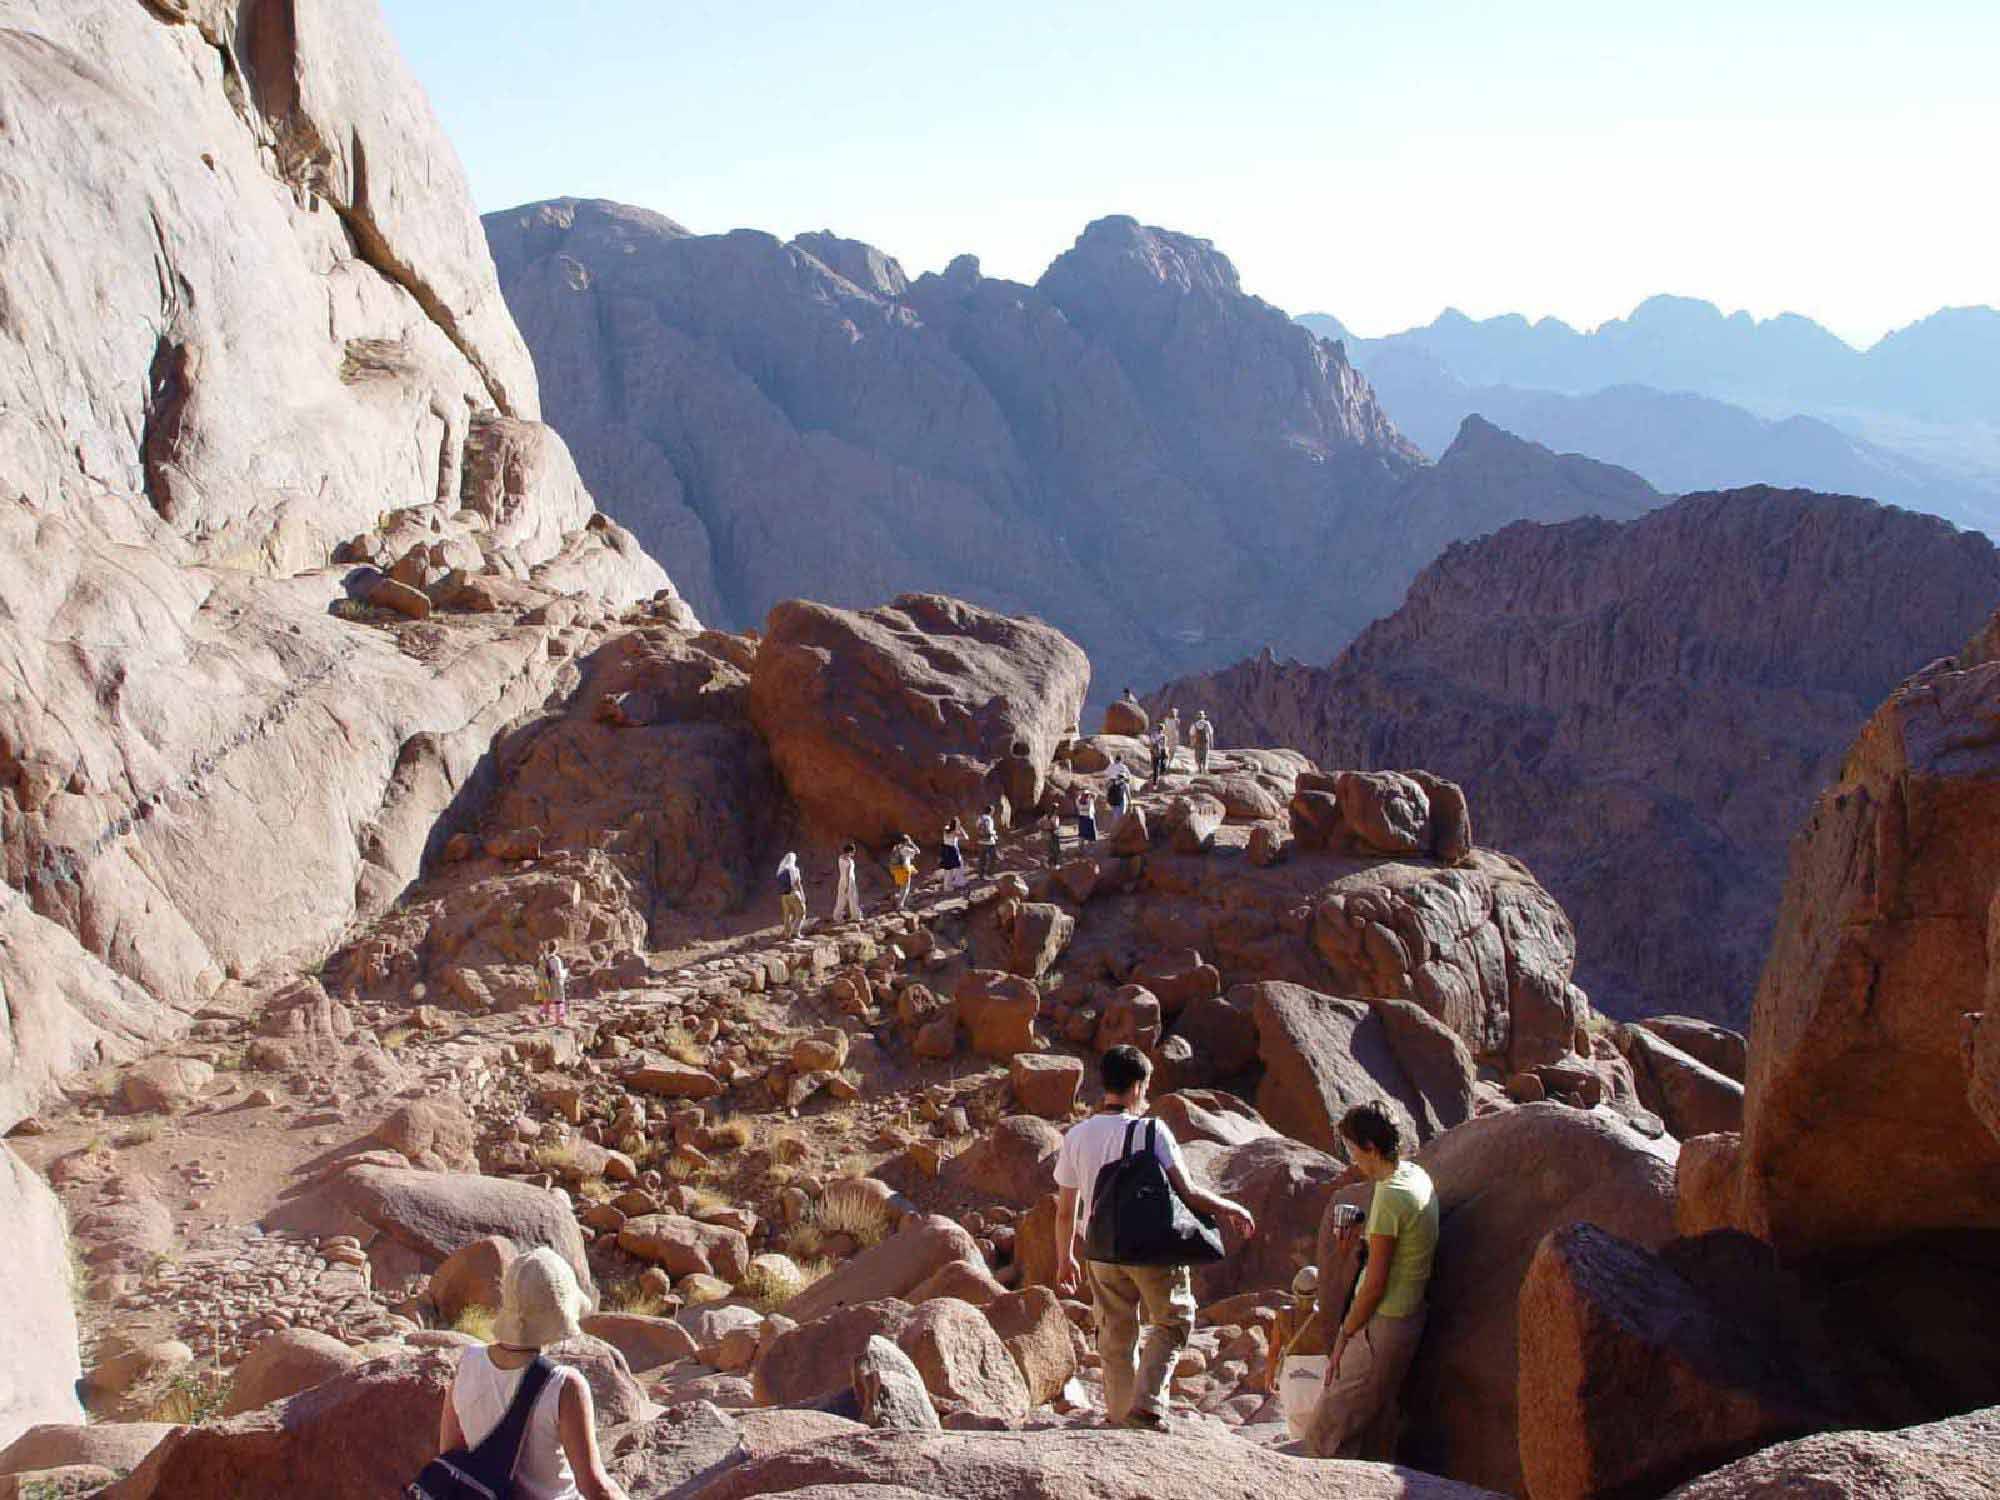 Travel through the night to Mount Sinai to climb the mountain at night to see sunrise from atop Moses' Mountain.